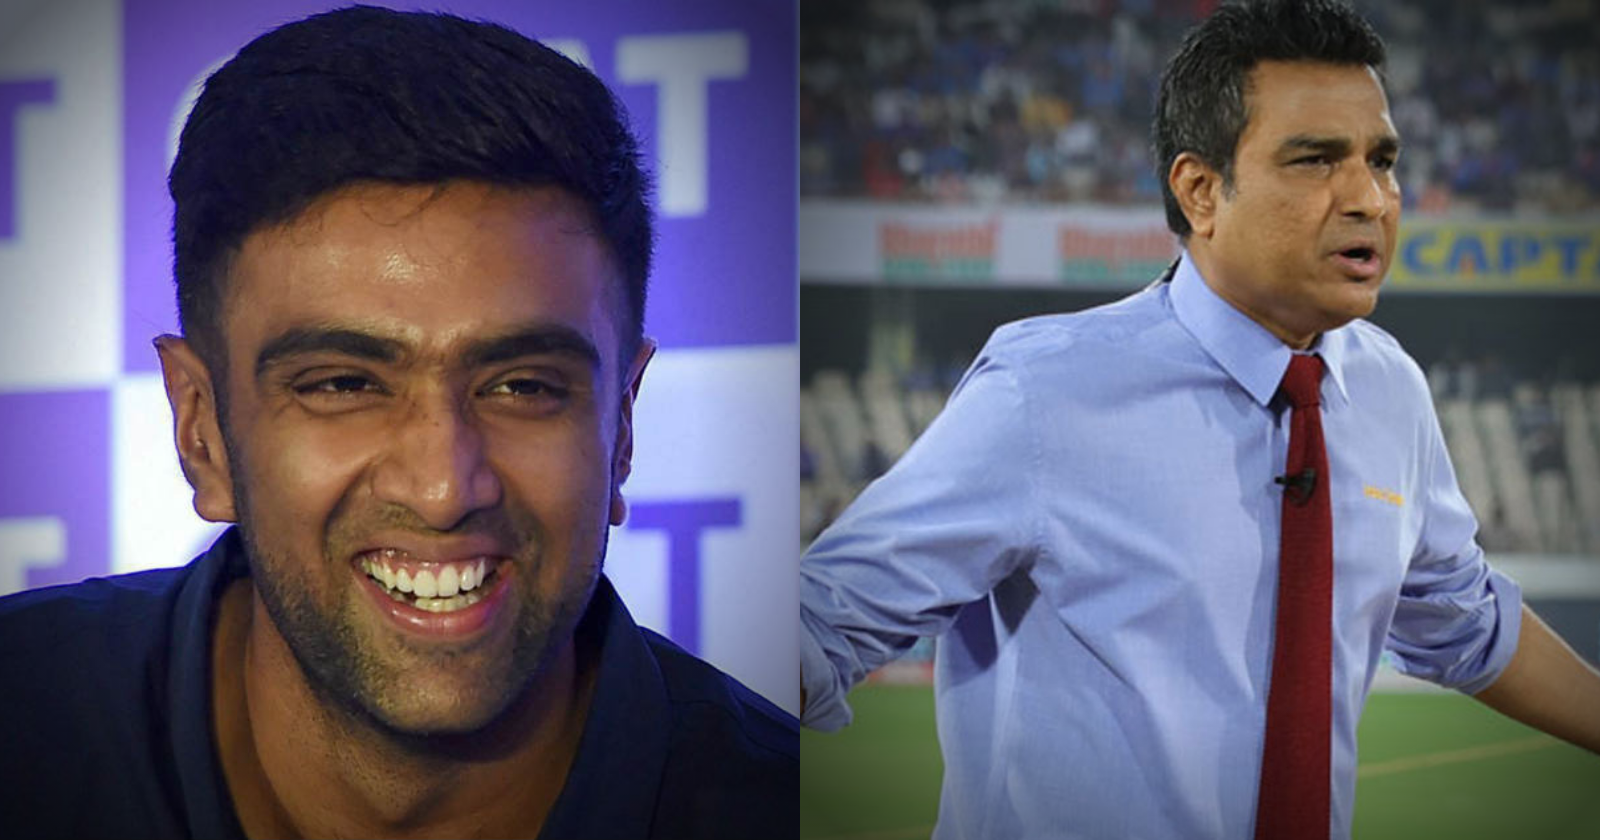 “It hurts,” Ravichandran Ashwin comes up with a hilarious response to Sanjay Manjrekar’s ‘all-time great’ remark